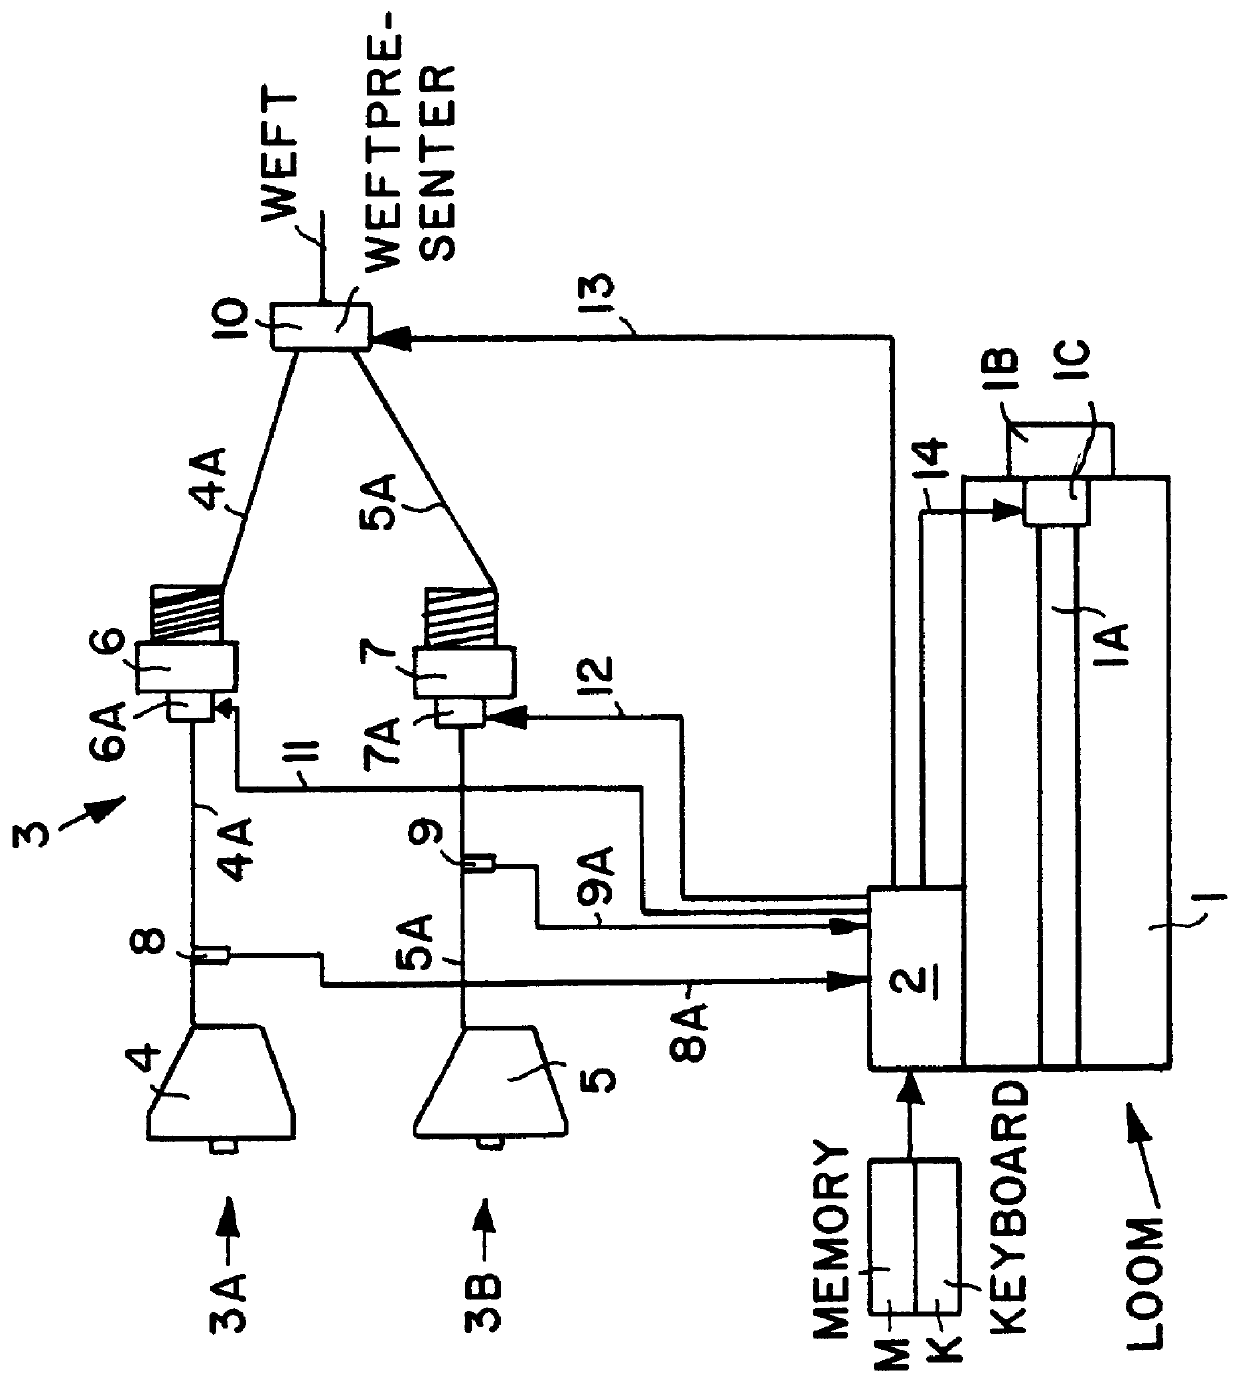 Method and apparatus for temporarily activating a brake in a weaving loom